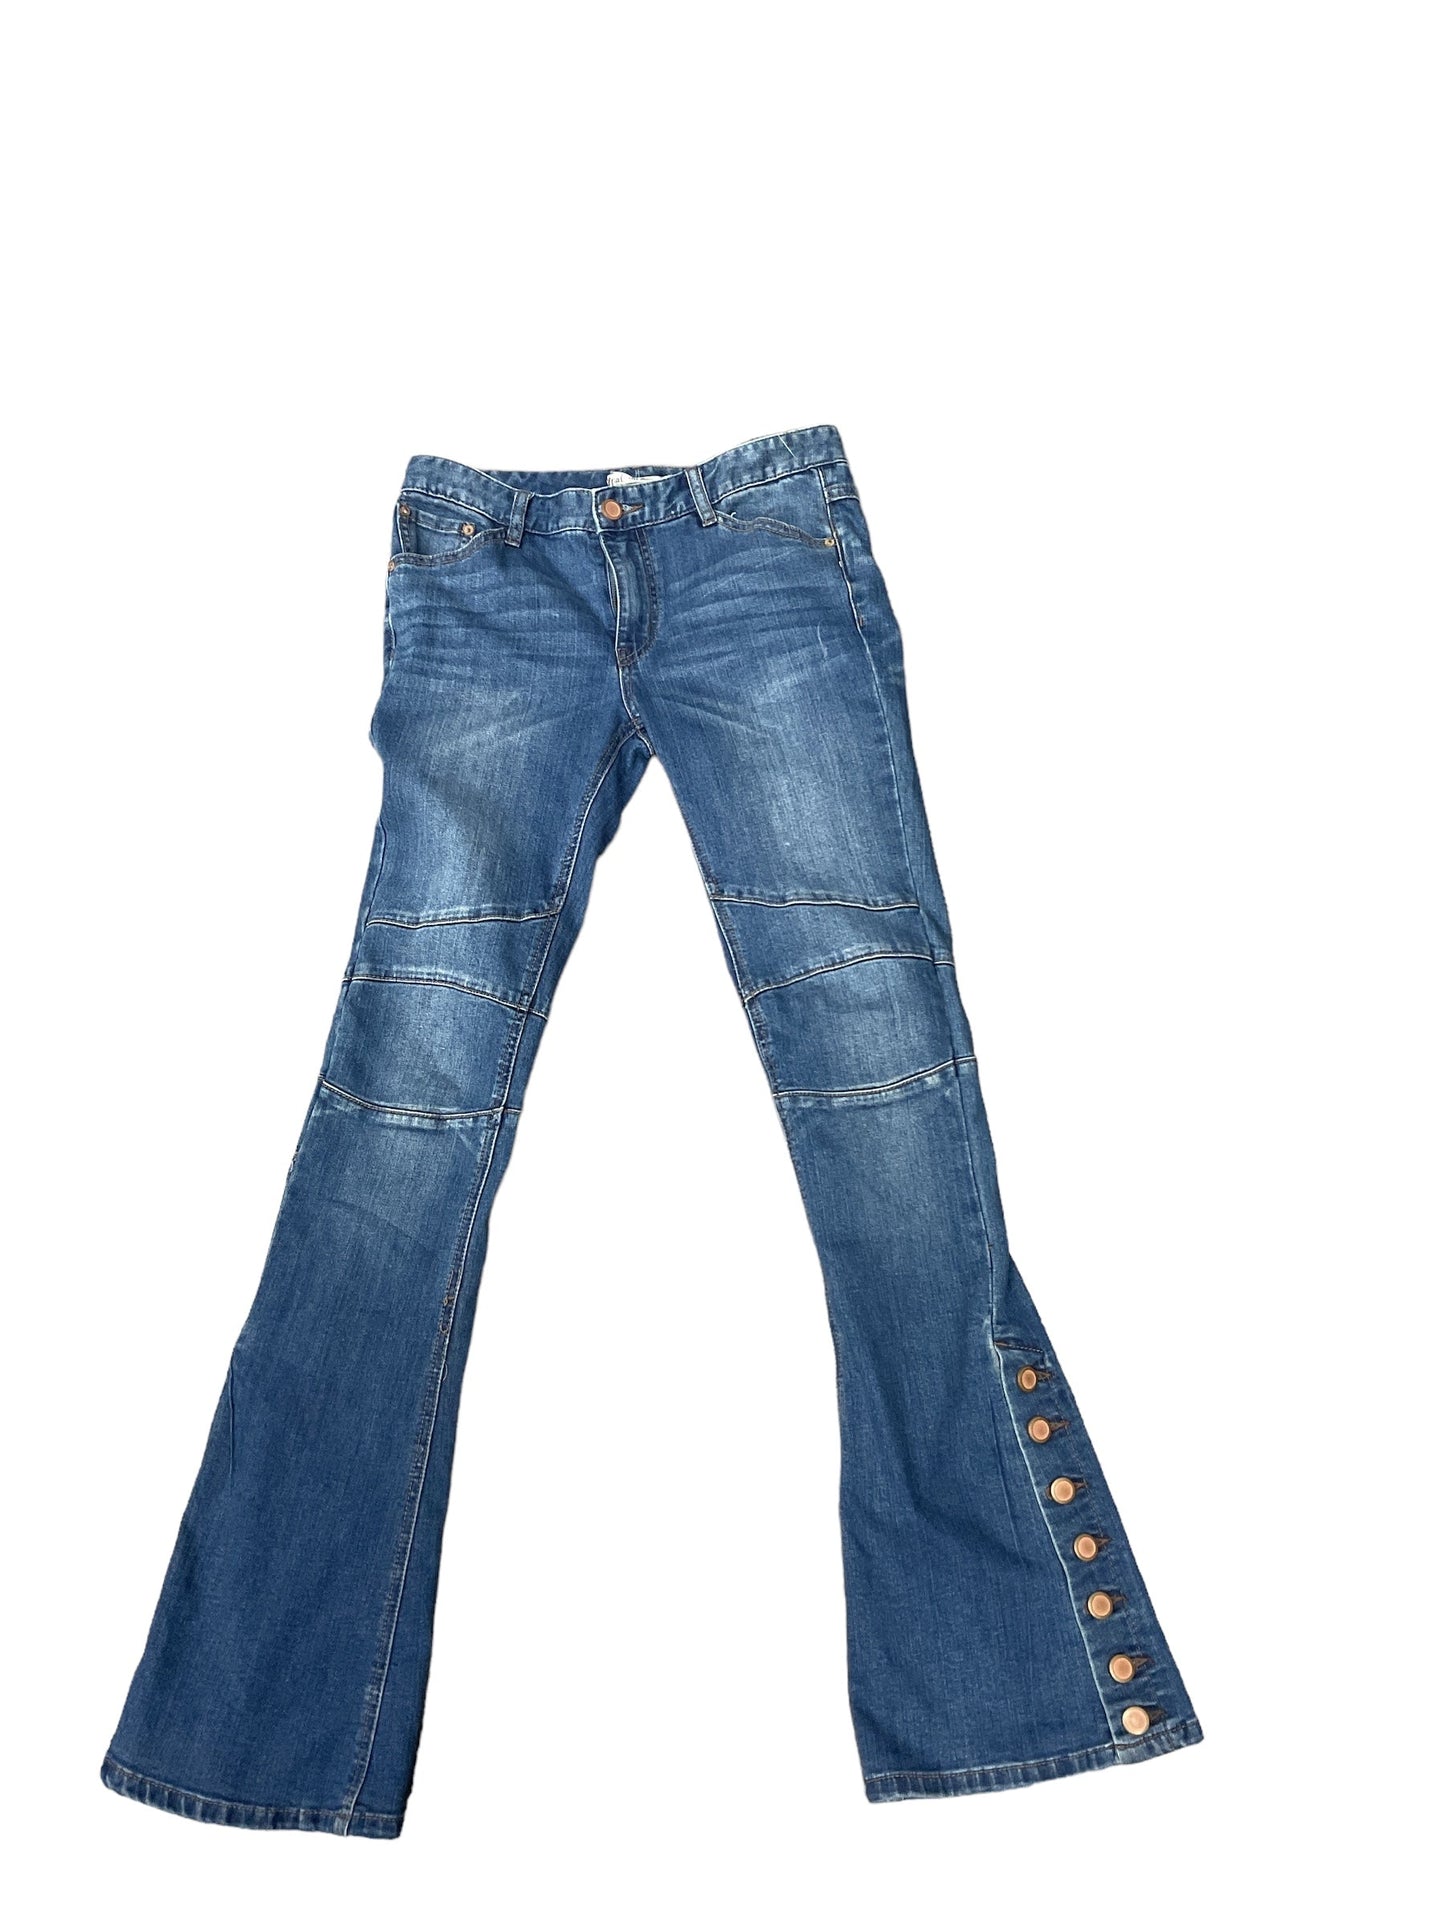 Jeans Flared By Free People  Size: 27